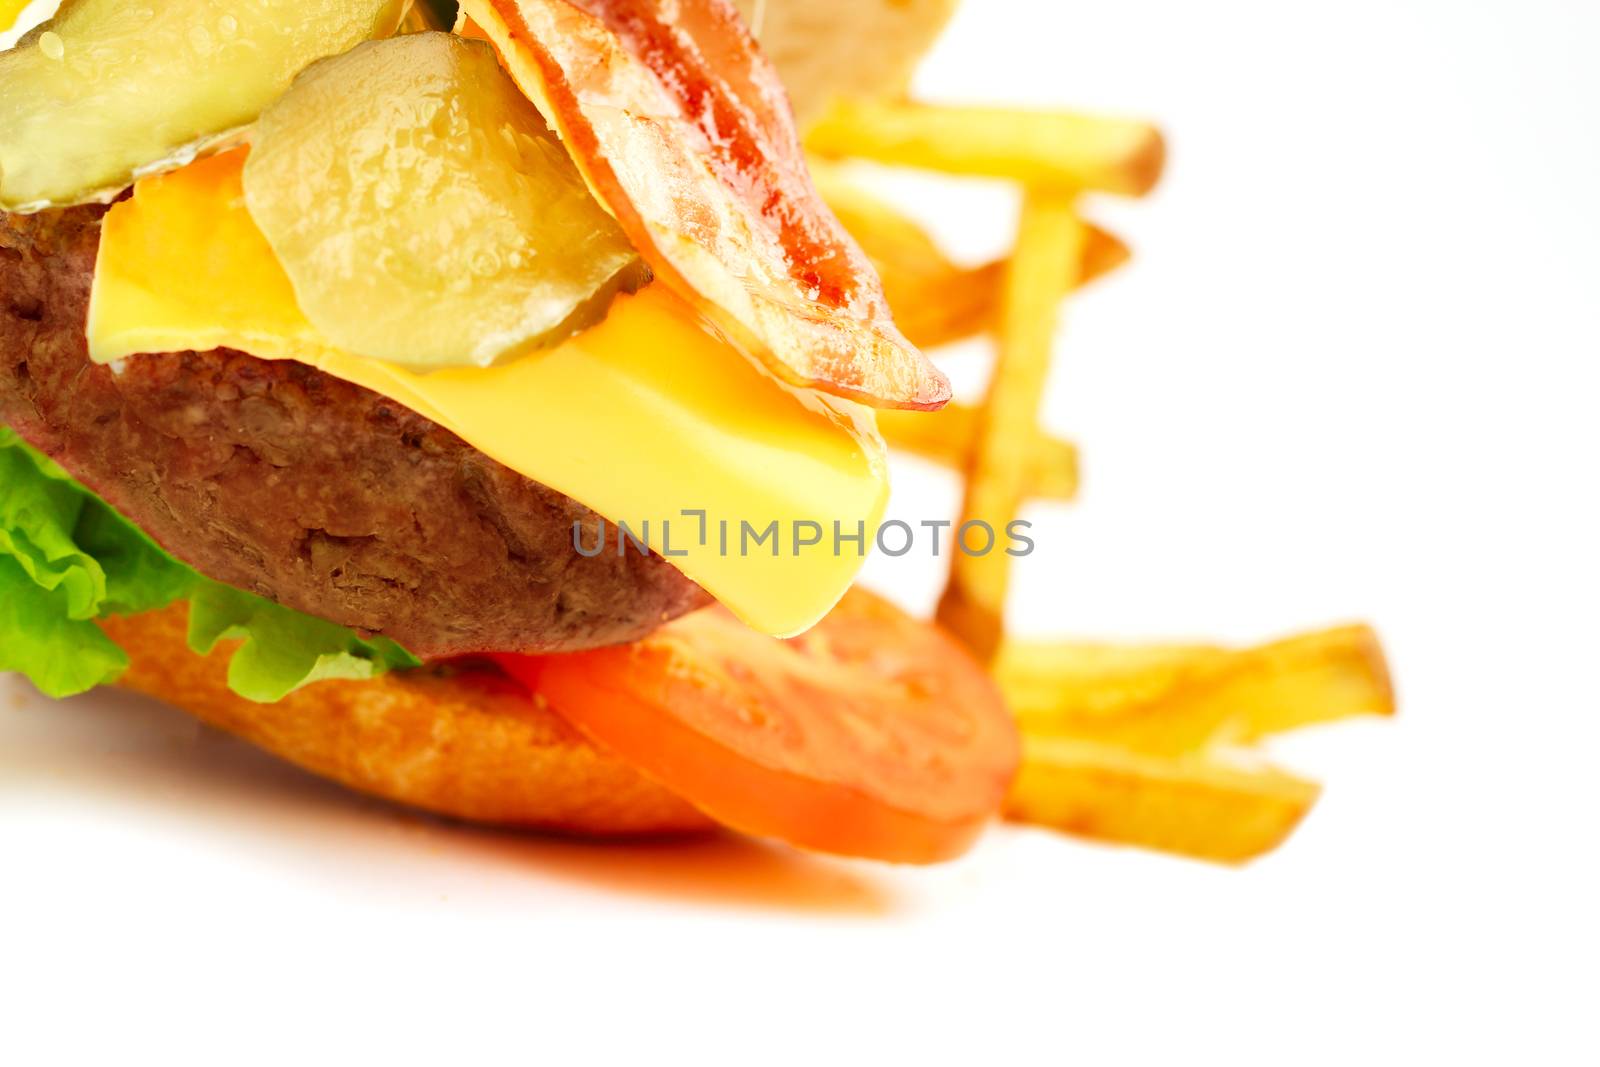 Exploded view of hamburger with french fries isolated on white background